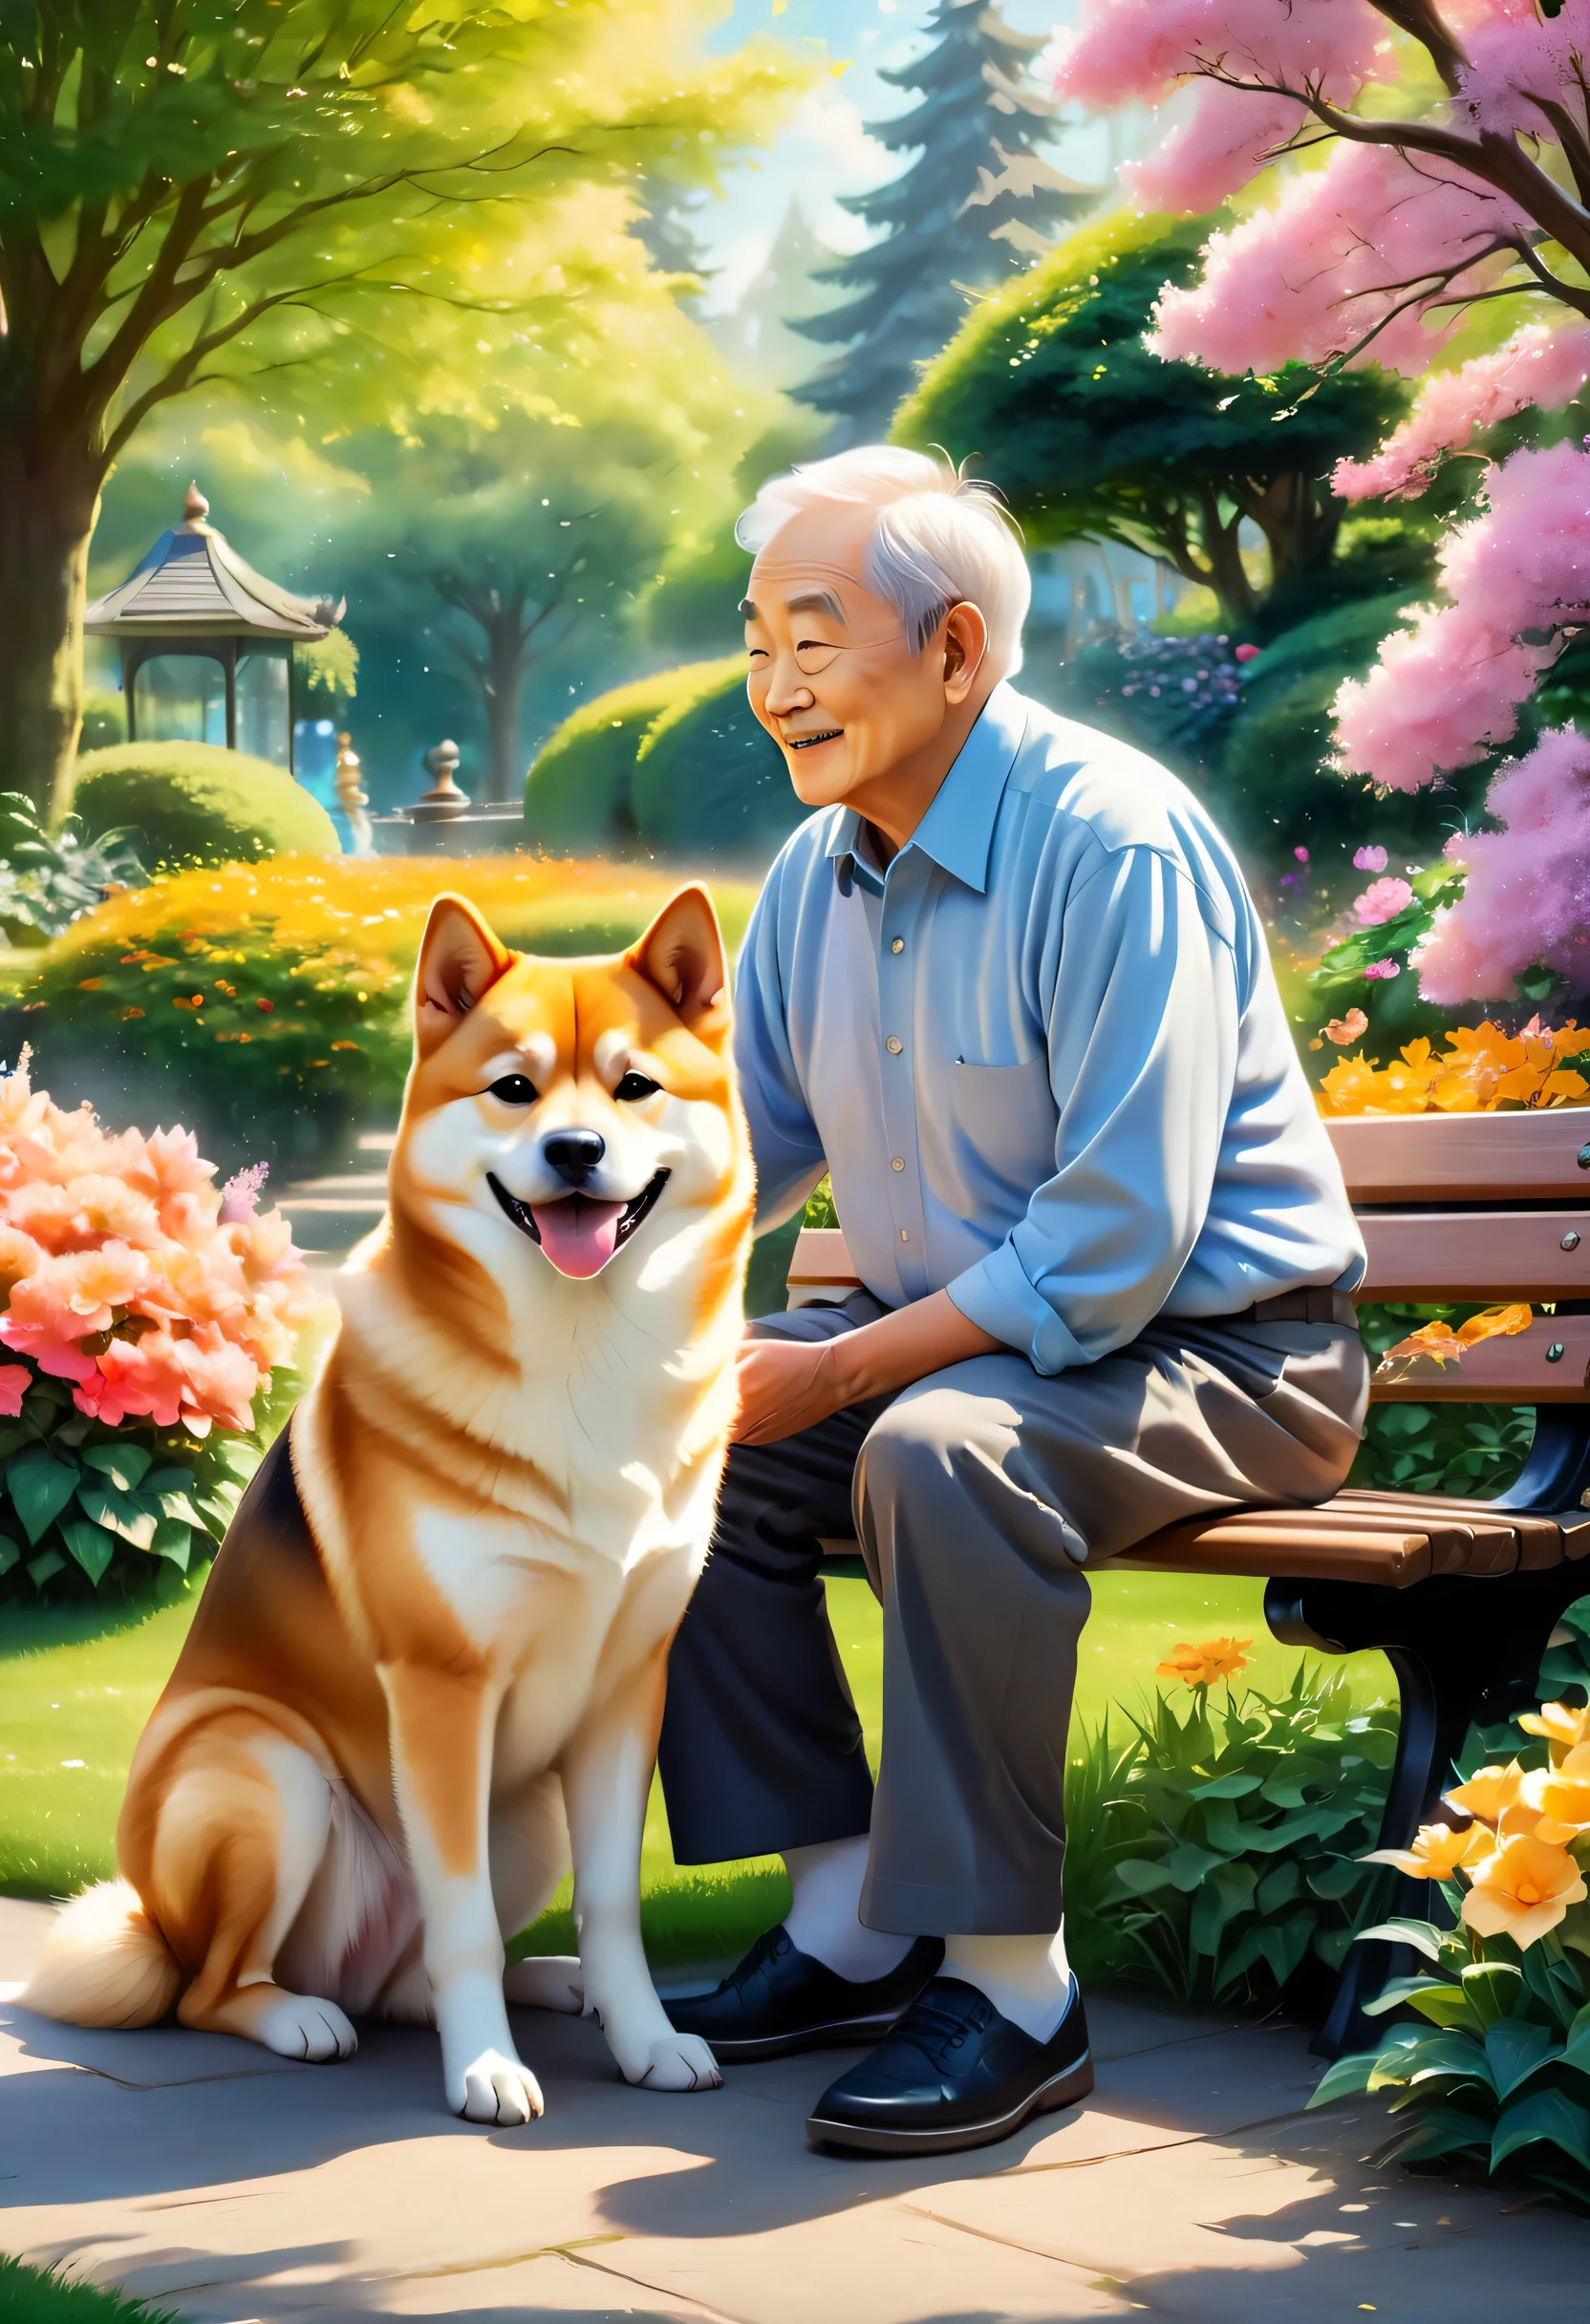 (best quality,highres,masterpiece:1.2),watercolor painting,Shiba Inu,elderly man sitting on a park bench,magical and heartwarming,sunlit garden scene,detailed fur texture,expressive brush strokes,pastel color palette,soft and gentle lighting,vibrant flowers blooming around,serene atmosphere,peaceful feeling,close-up of the dog's wagging tail,crisp and clear details,emotional connection between the dog and the elderly man,tranquil ambiance,implied storytelling,whimsical and dreamy,moment frozen in time,love and companionship,enchanting bond between human and animal